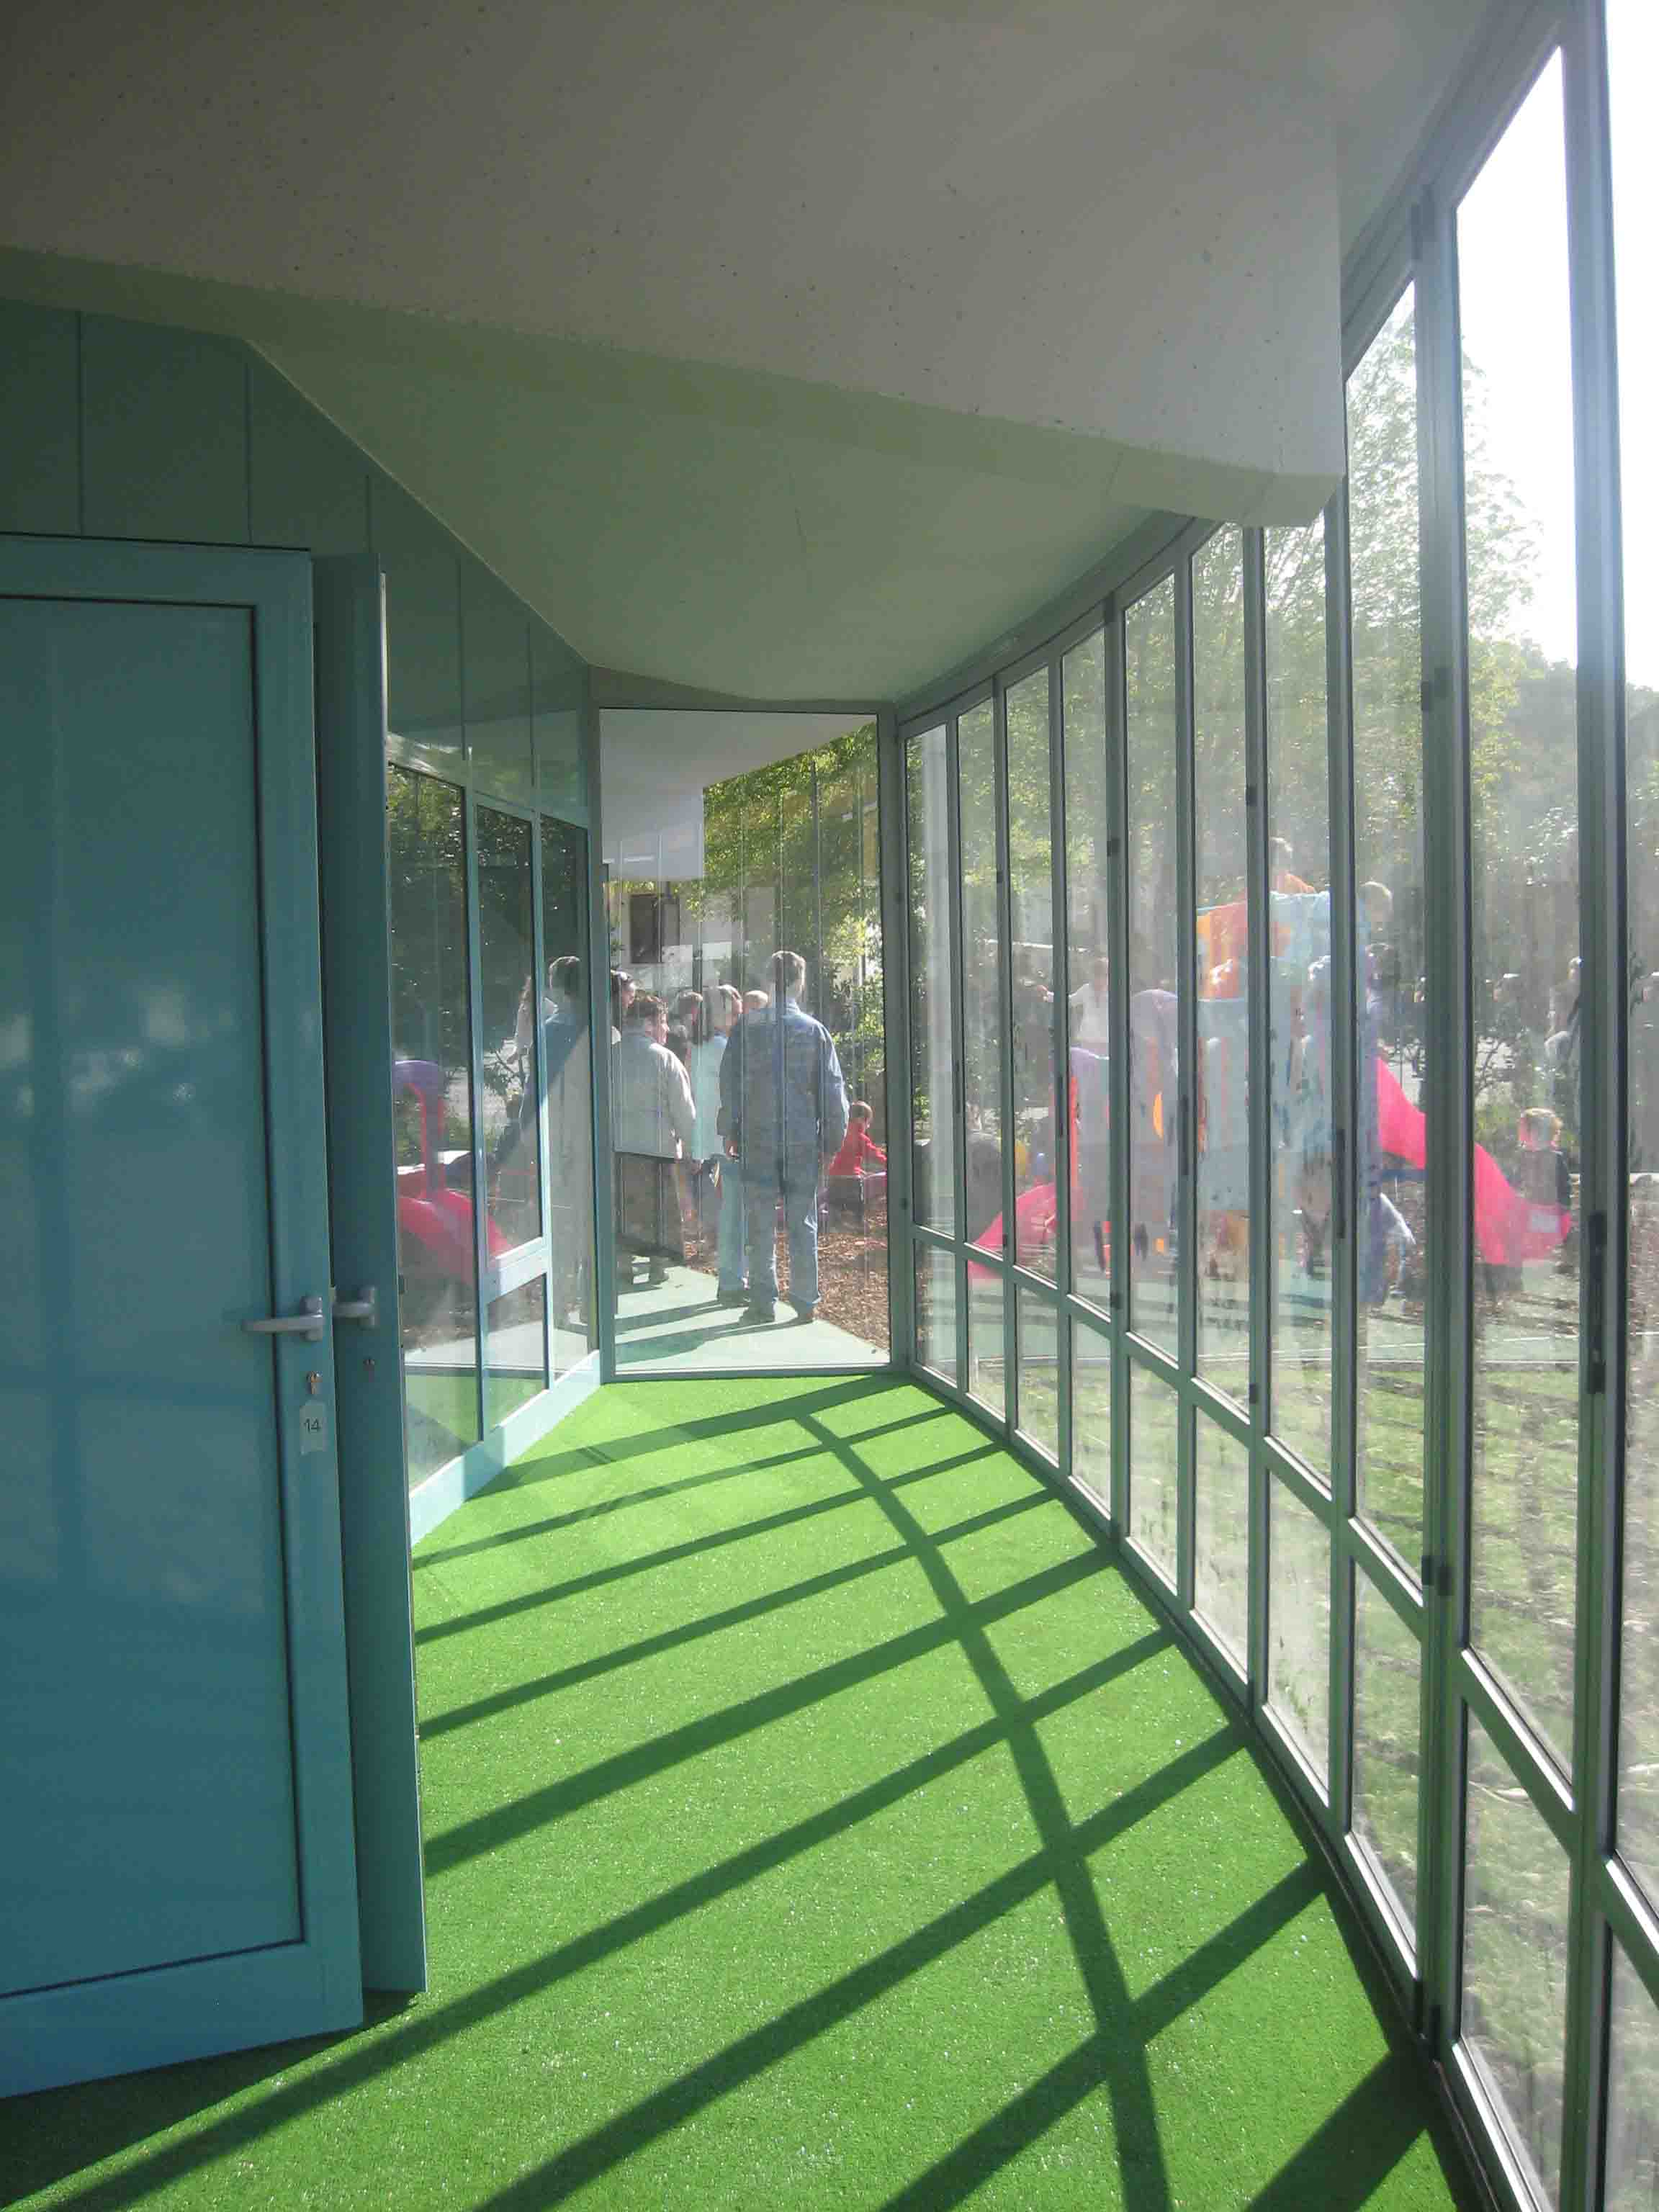 The use of space is flexible and highly efficient to maximise outside playground space and the park.